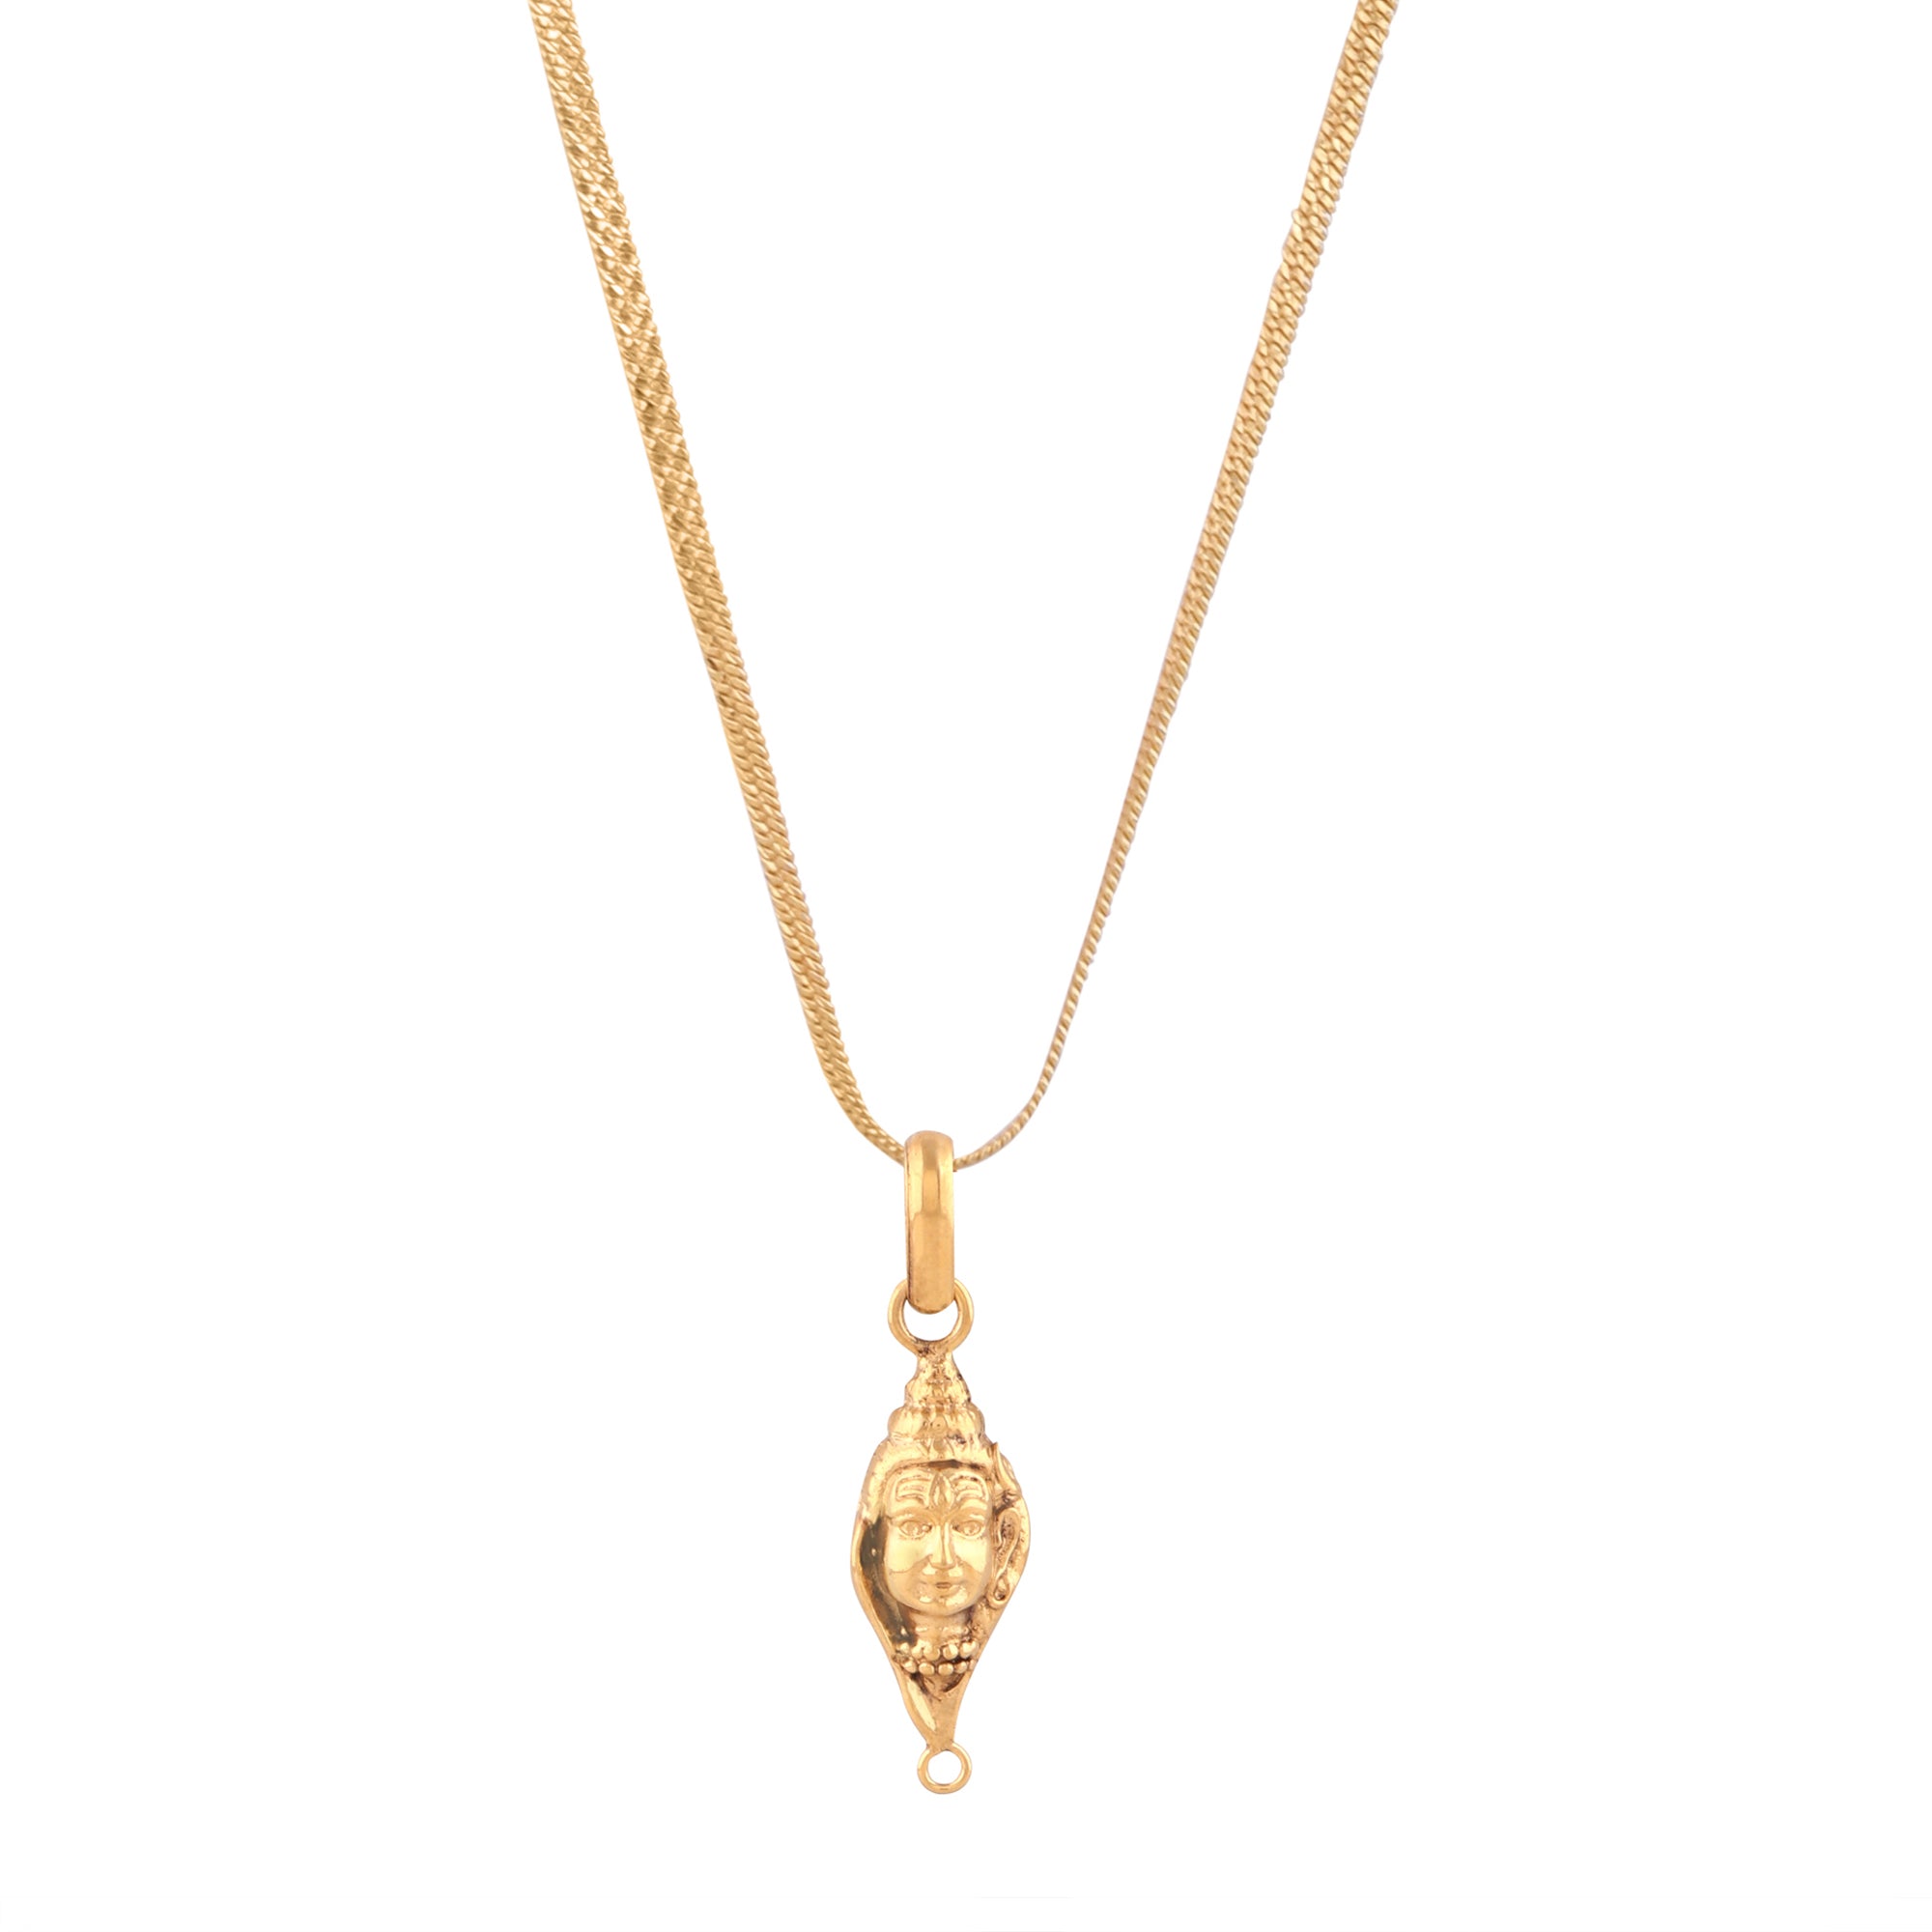 Panchdhatu Shiv Pendant with chain Pendat for Men and Women